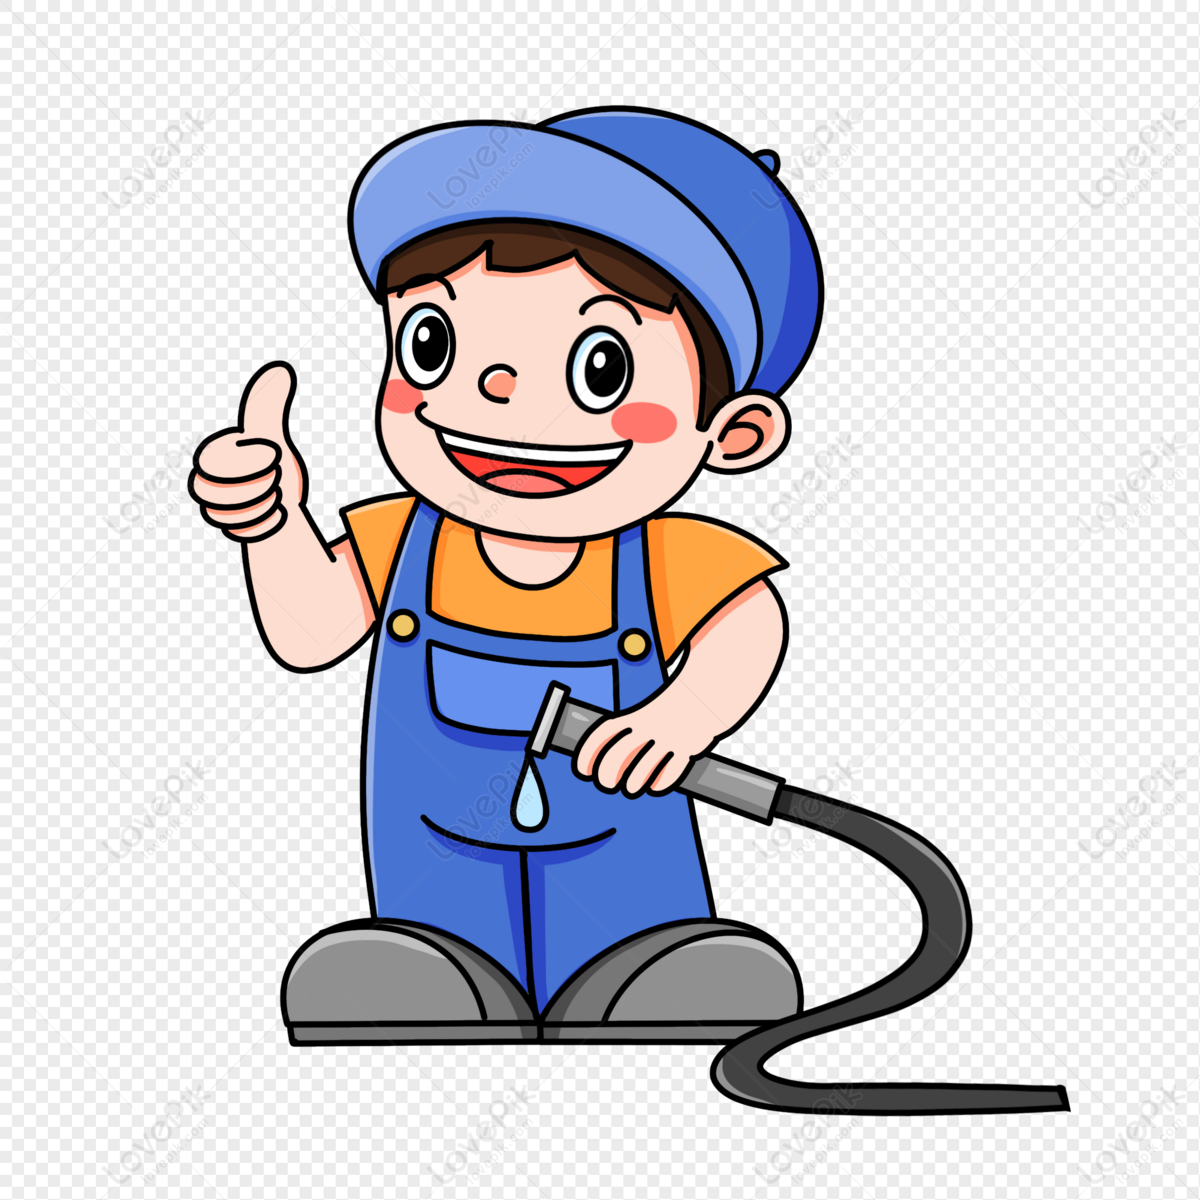 Cartoon Q Version Of The Car Wash Worker Ip Image Free PNG And Clipart  Image For Free Download - Lovepik | 401743479